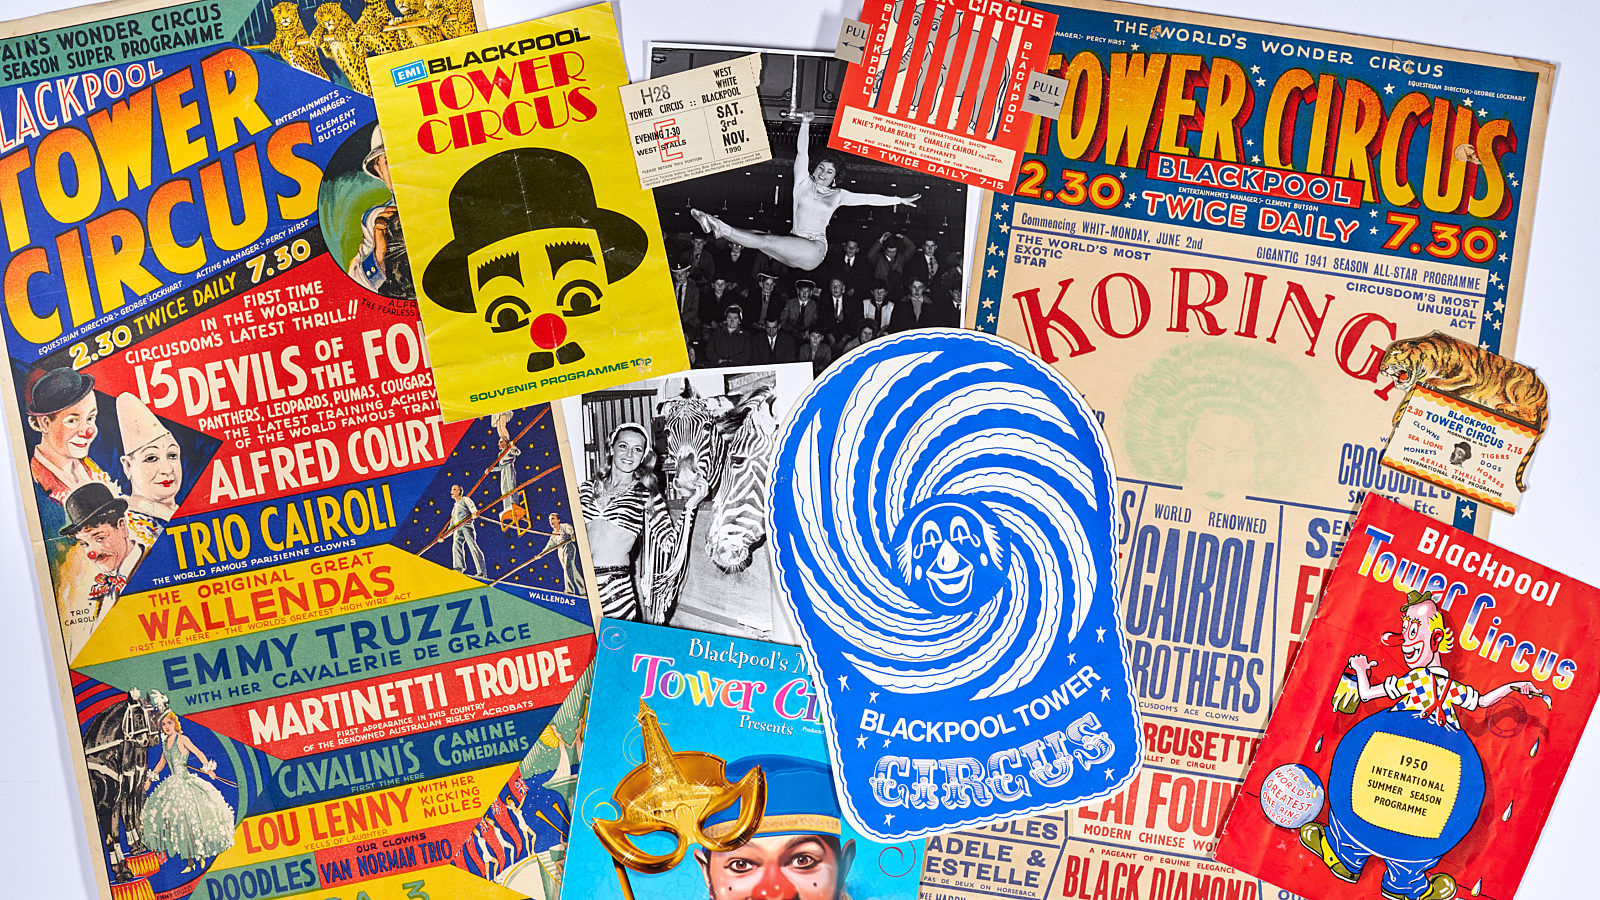 Photograph of a range of bright, colourful posters from Blackpool Tower Circus